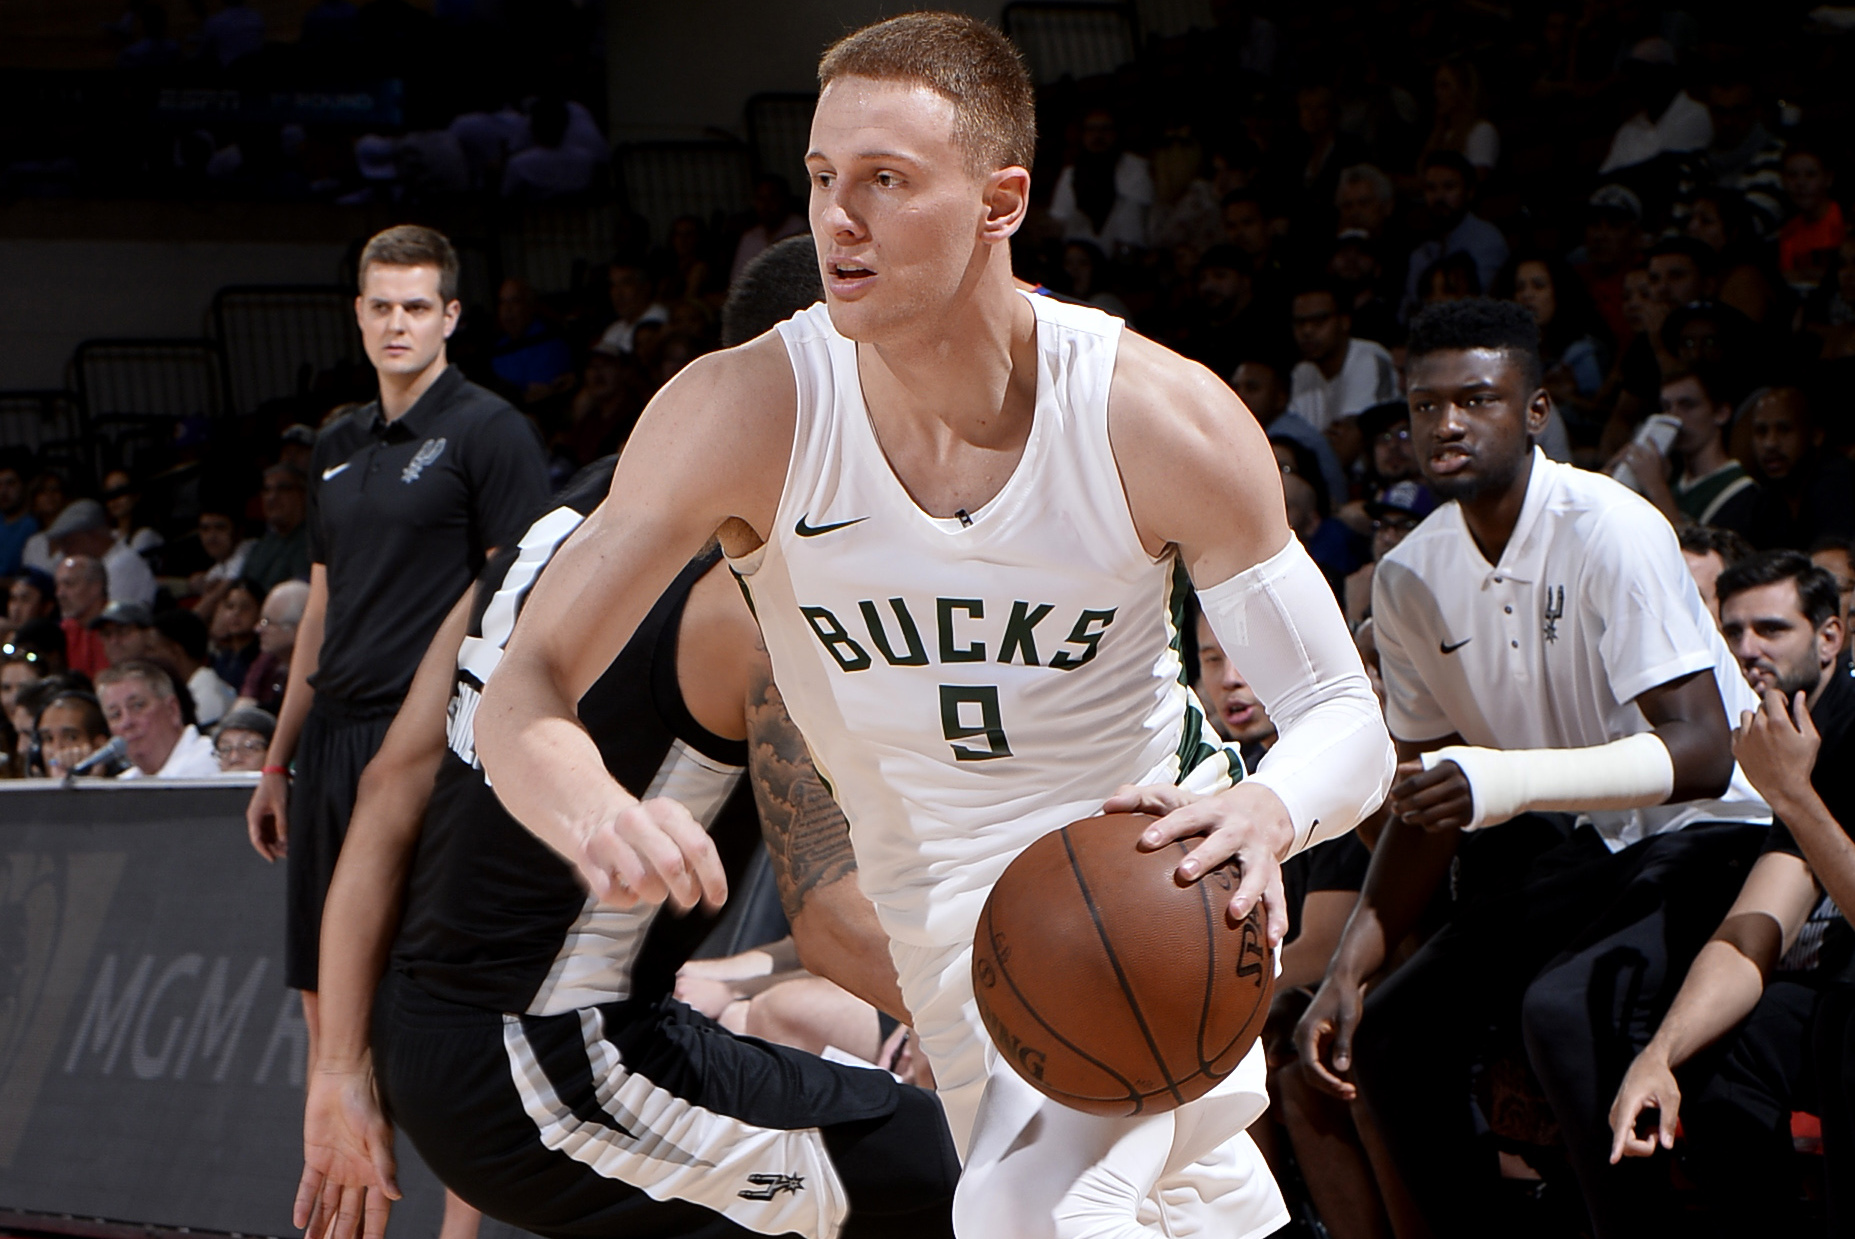 Bucks: Starting guard Donte DiVincenzo to miss rest of playoffs - NBC Sports